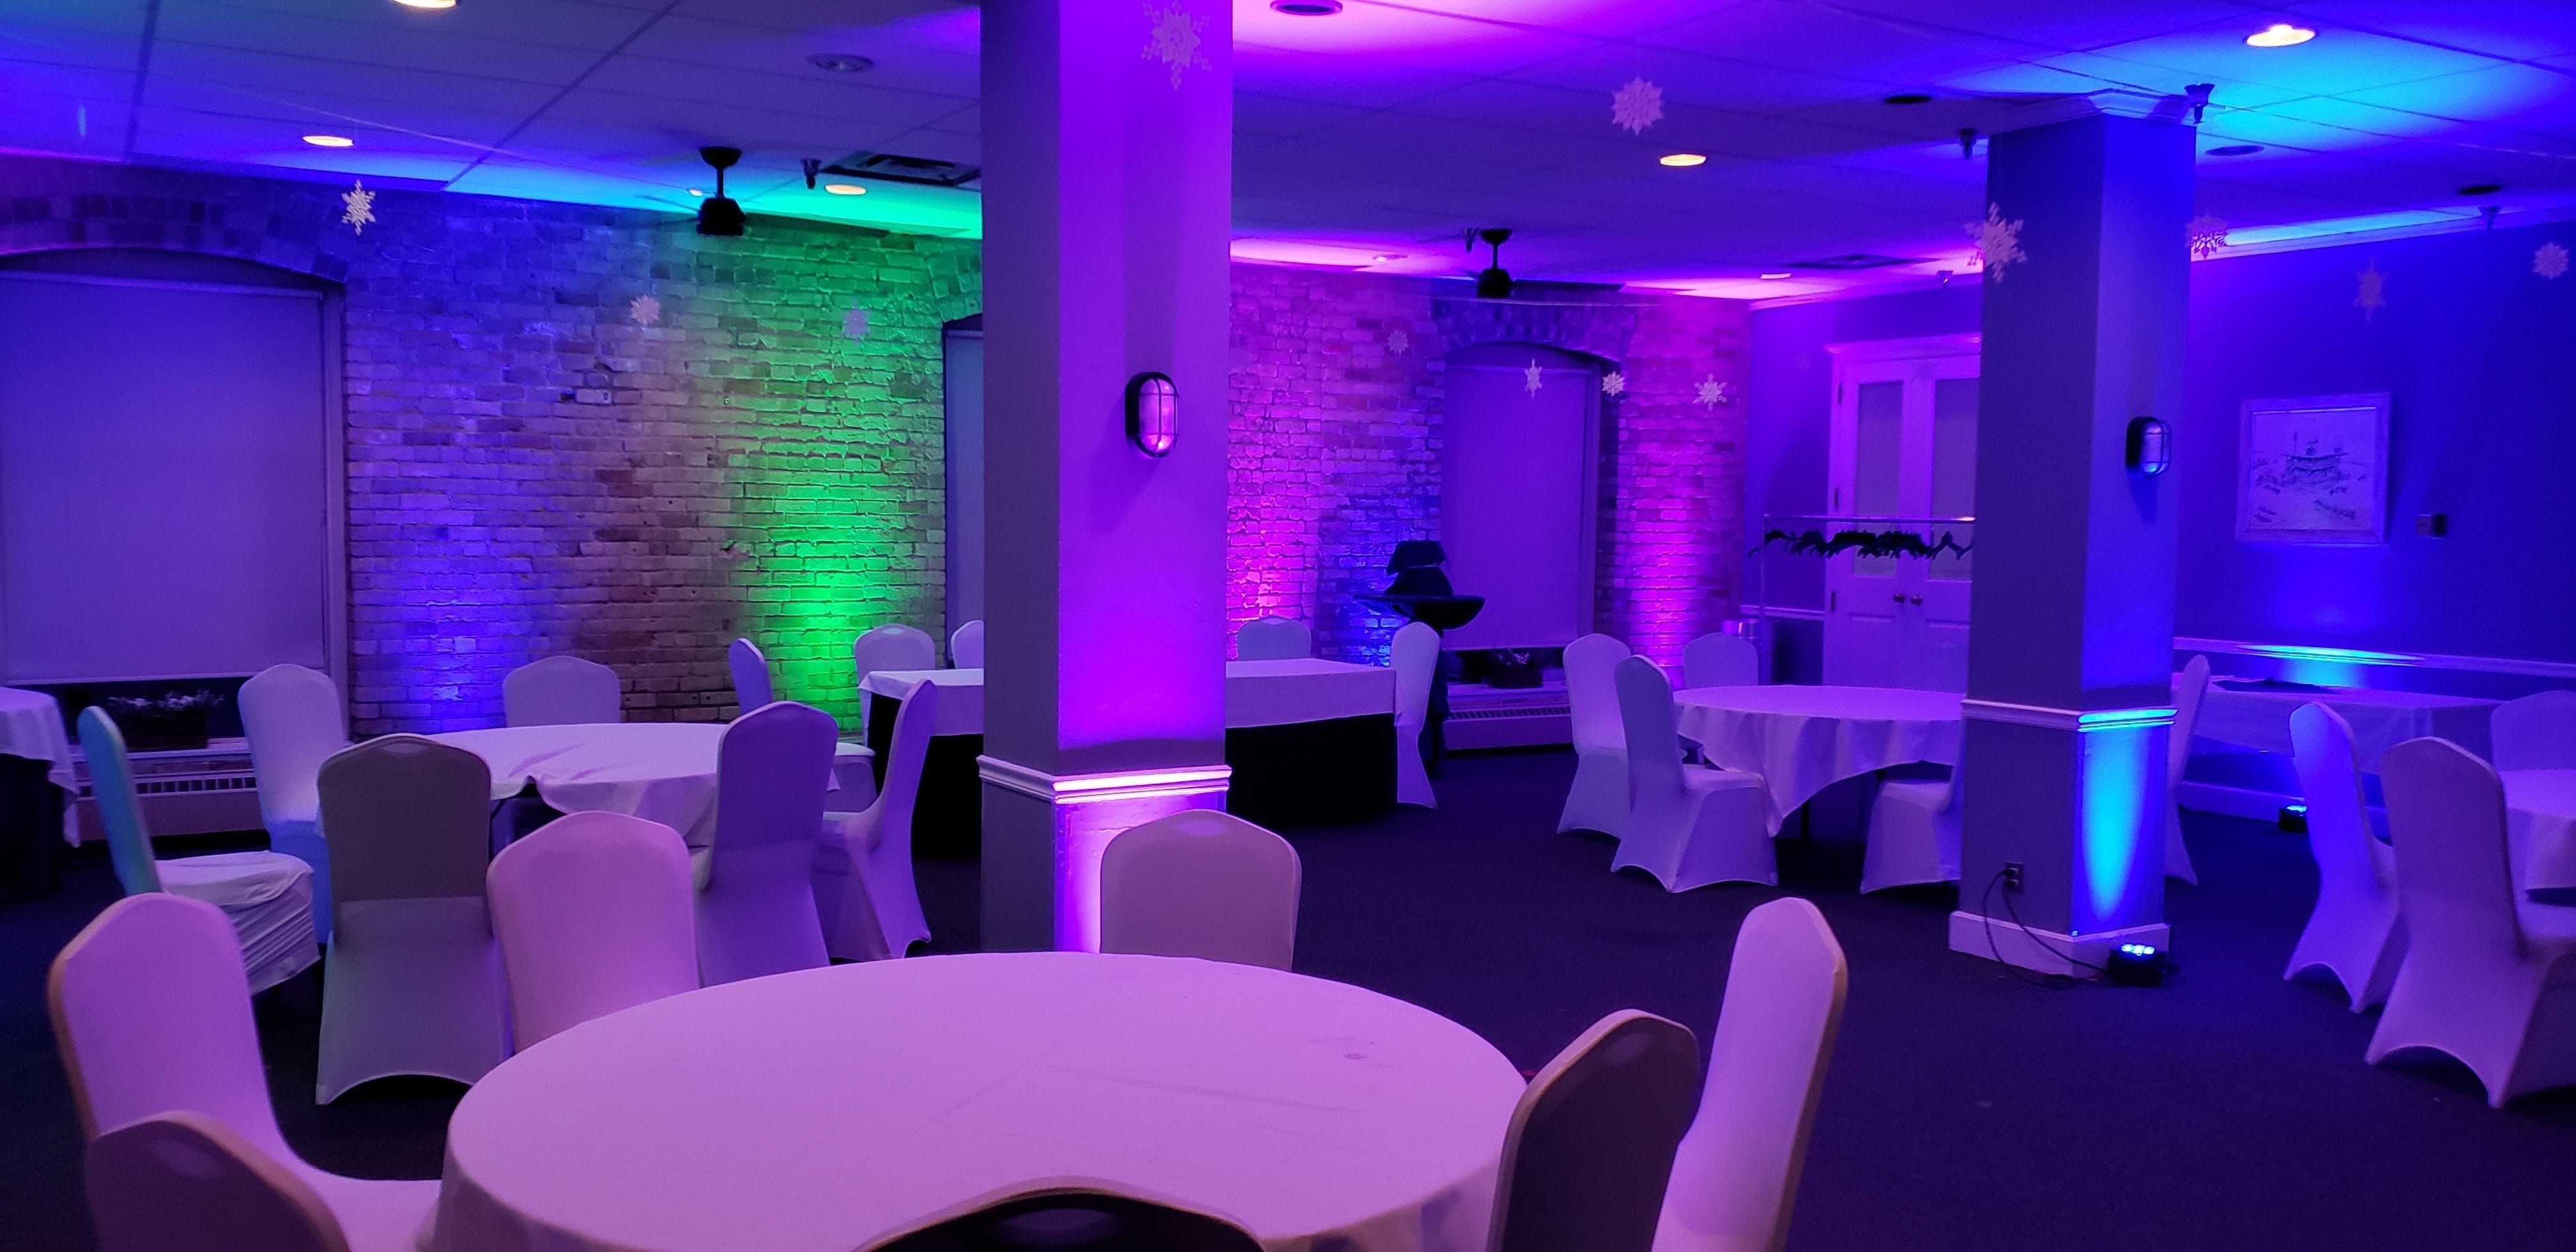 Wedding lighting at the Boat Club in blue, teal and purple.